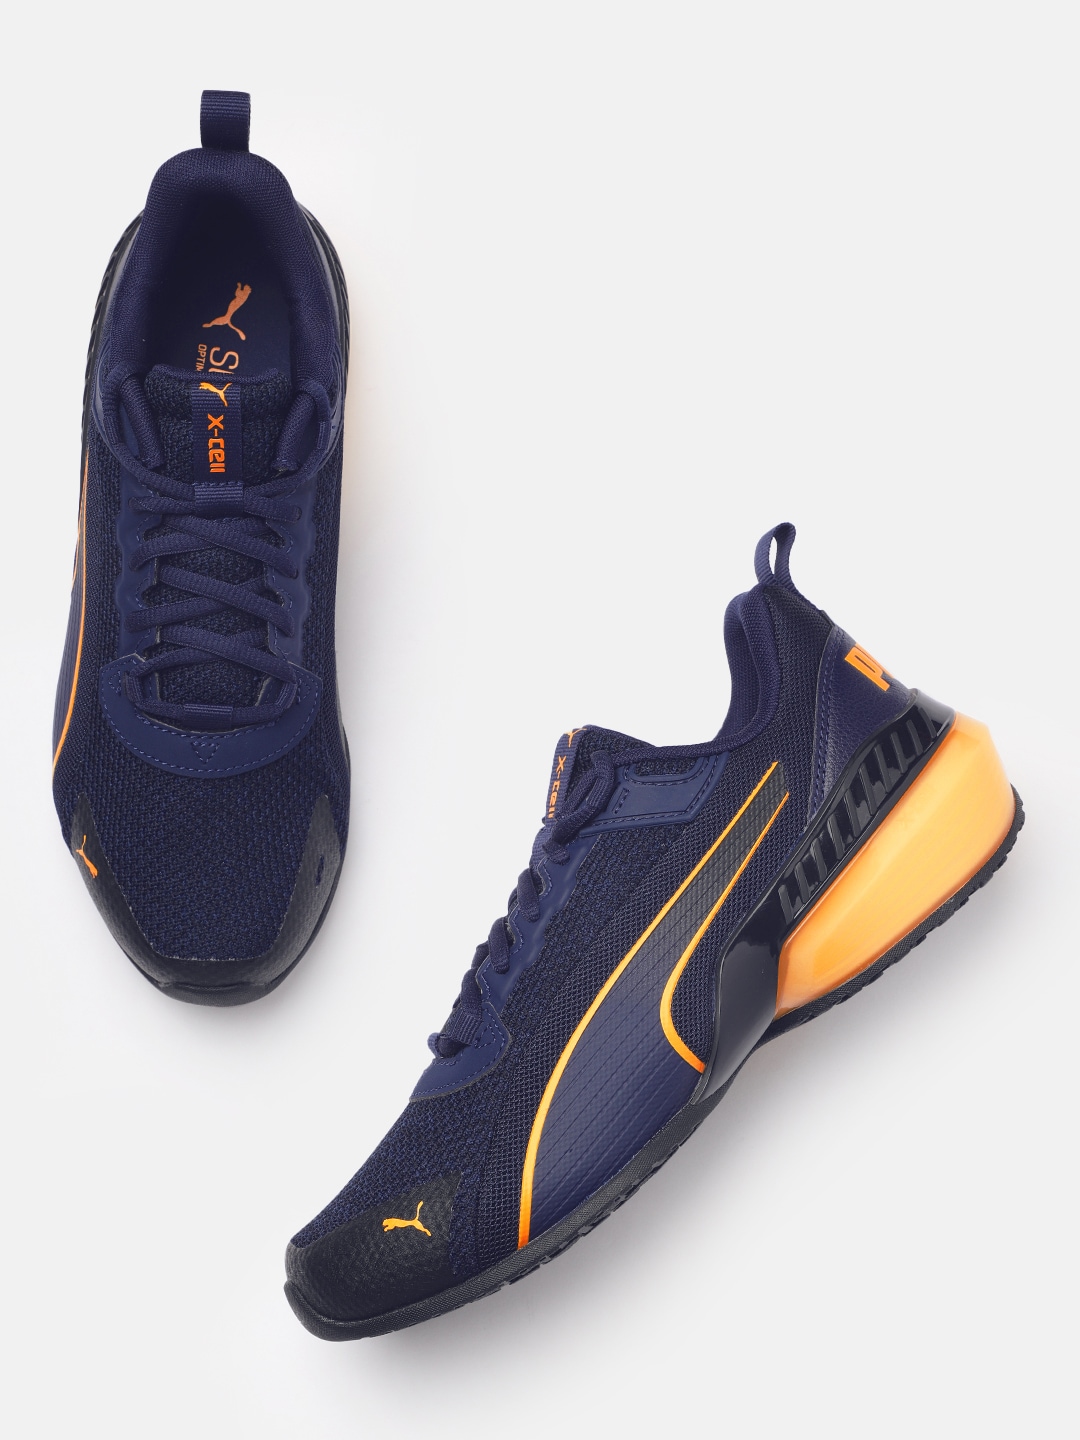 Puma Unisex Navy Blue X-Cell Uprise Fade Running Shoes Price in India